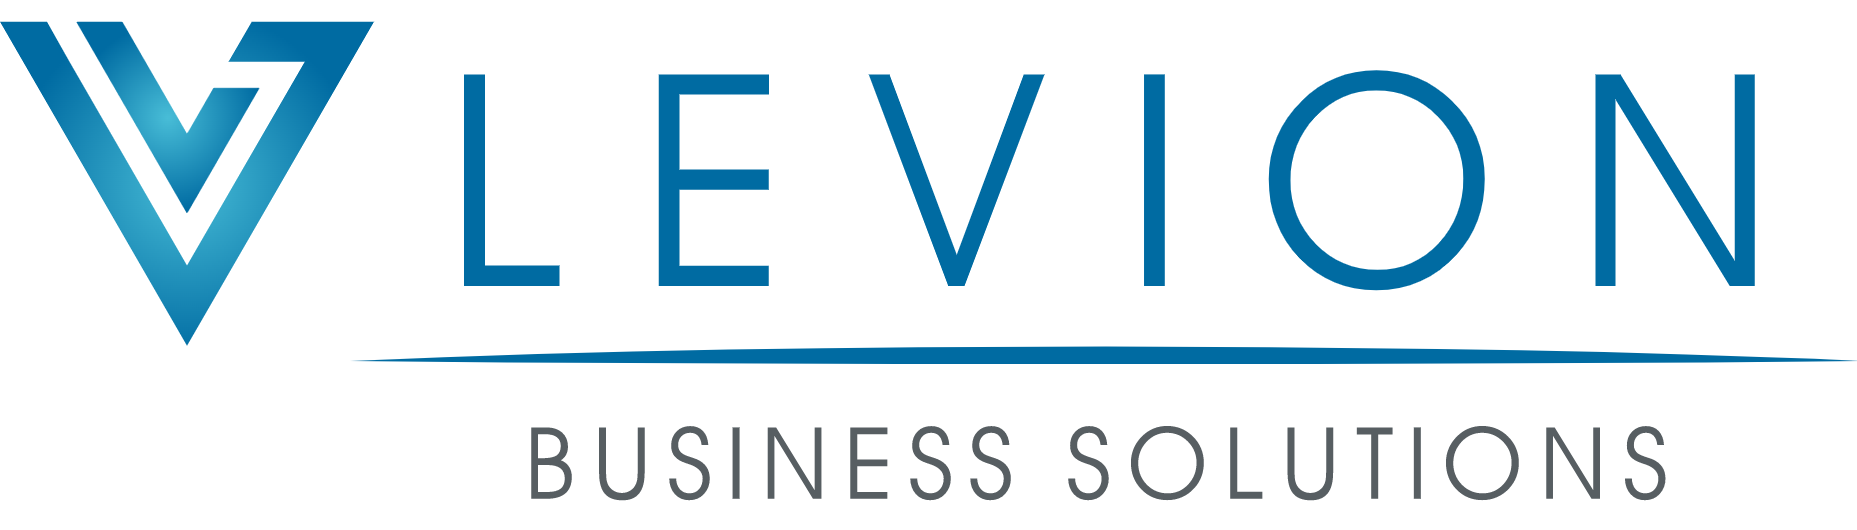 Levion Business Solutions GmbH